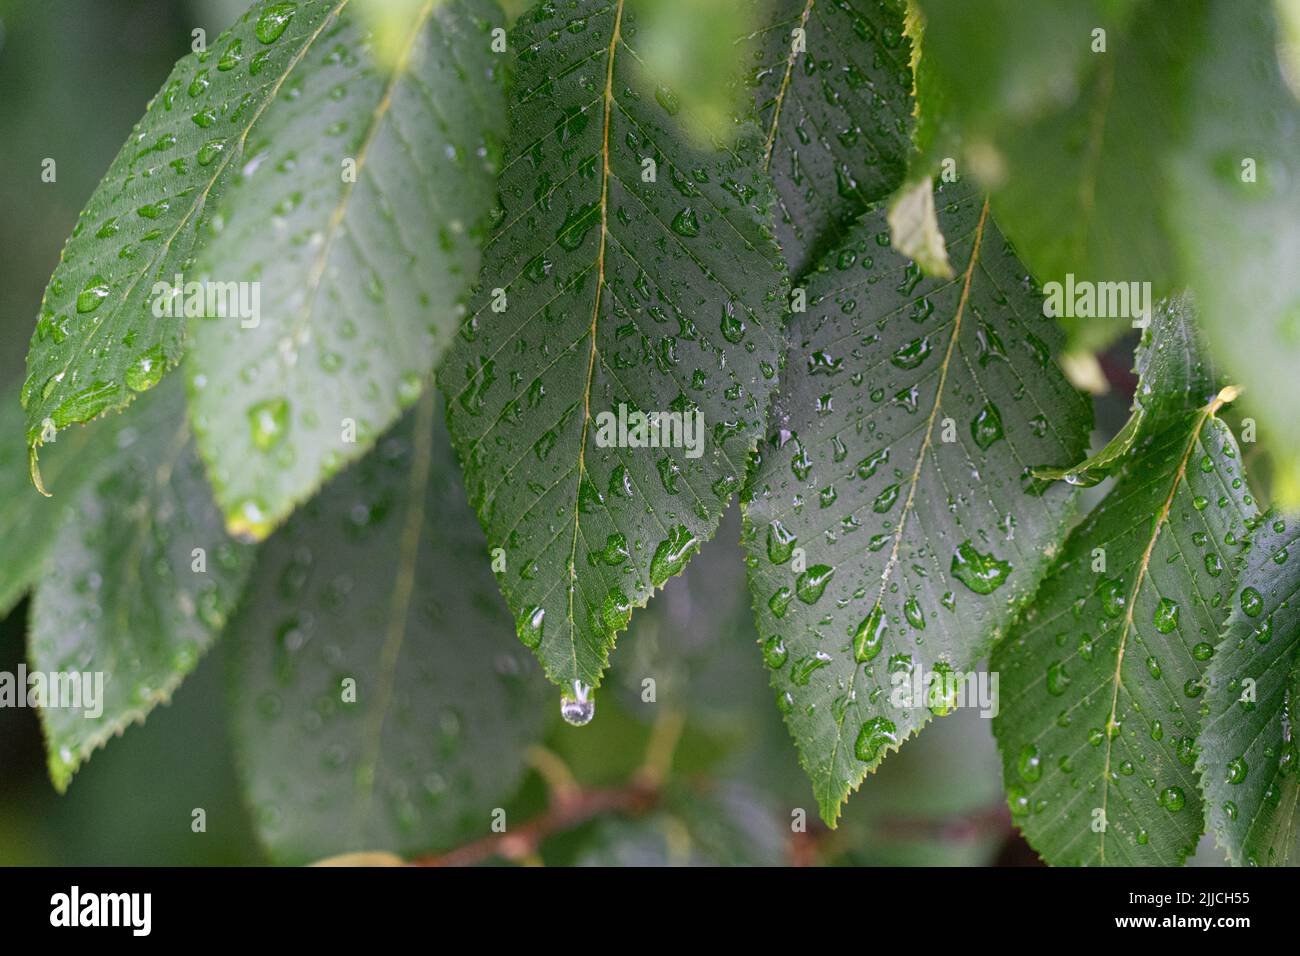 After the rain shower: Water droplets sitting on green leaves Stock Photo